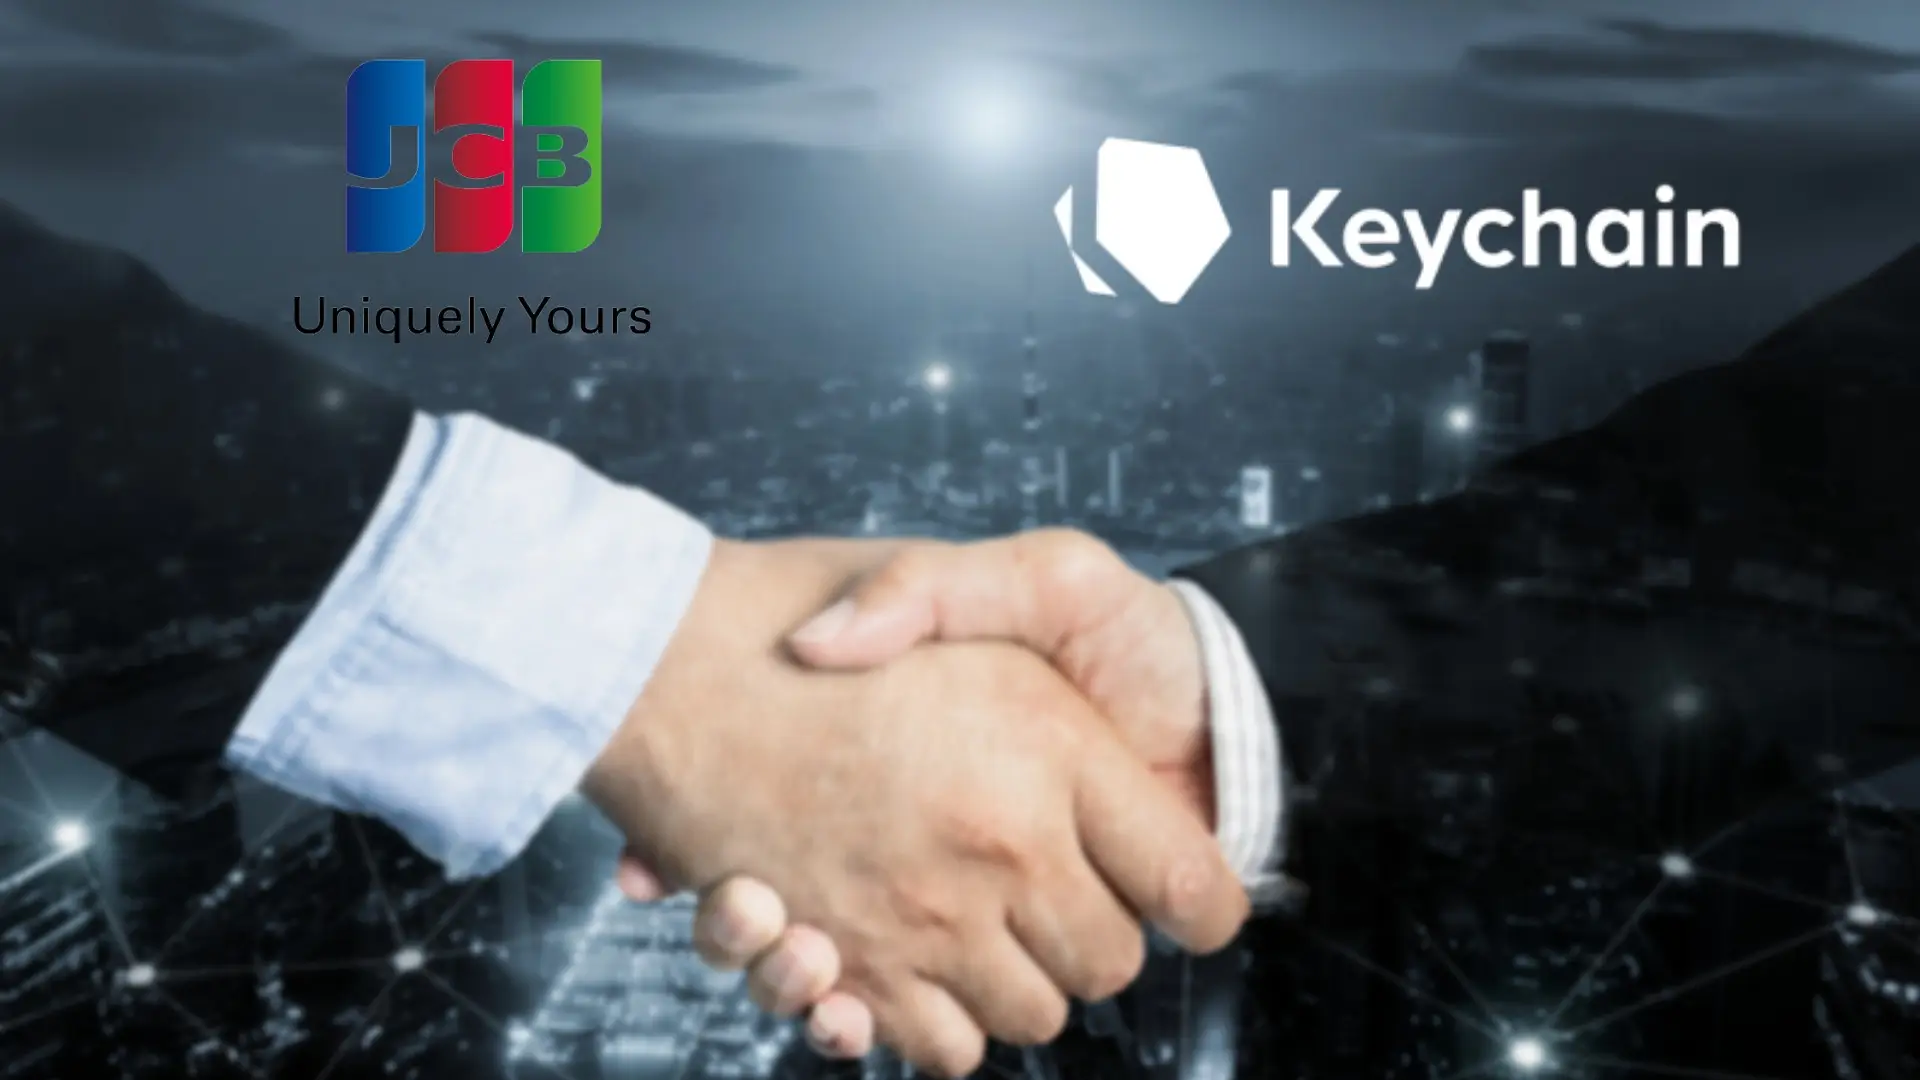 JCB and Keychain Sign Strategic Agreement to Leverage Blockchain for Payments